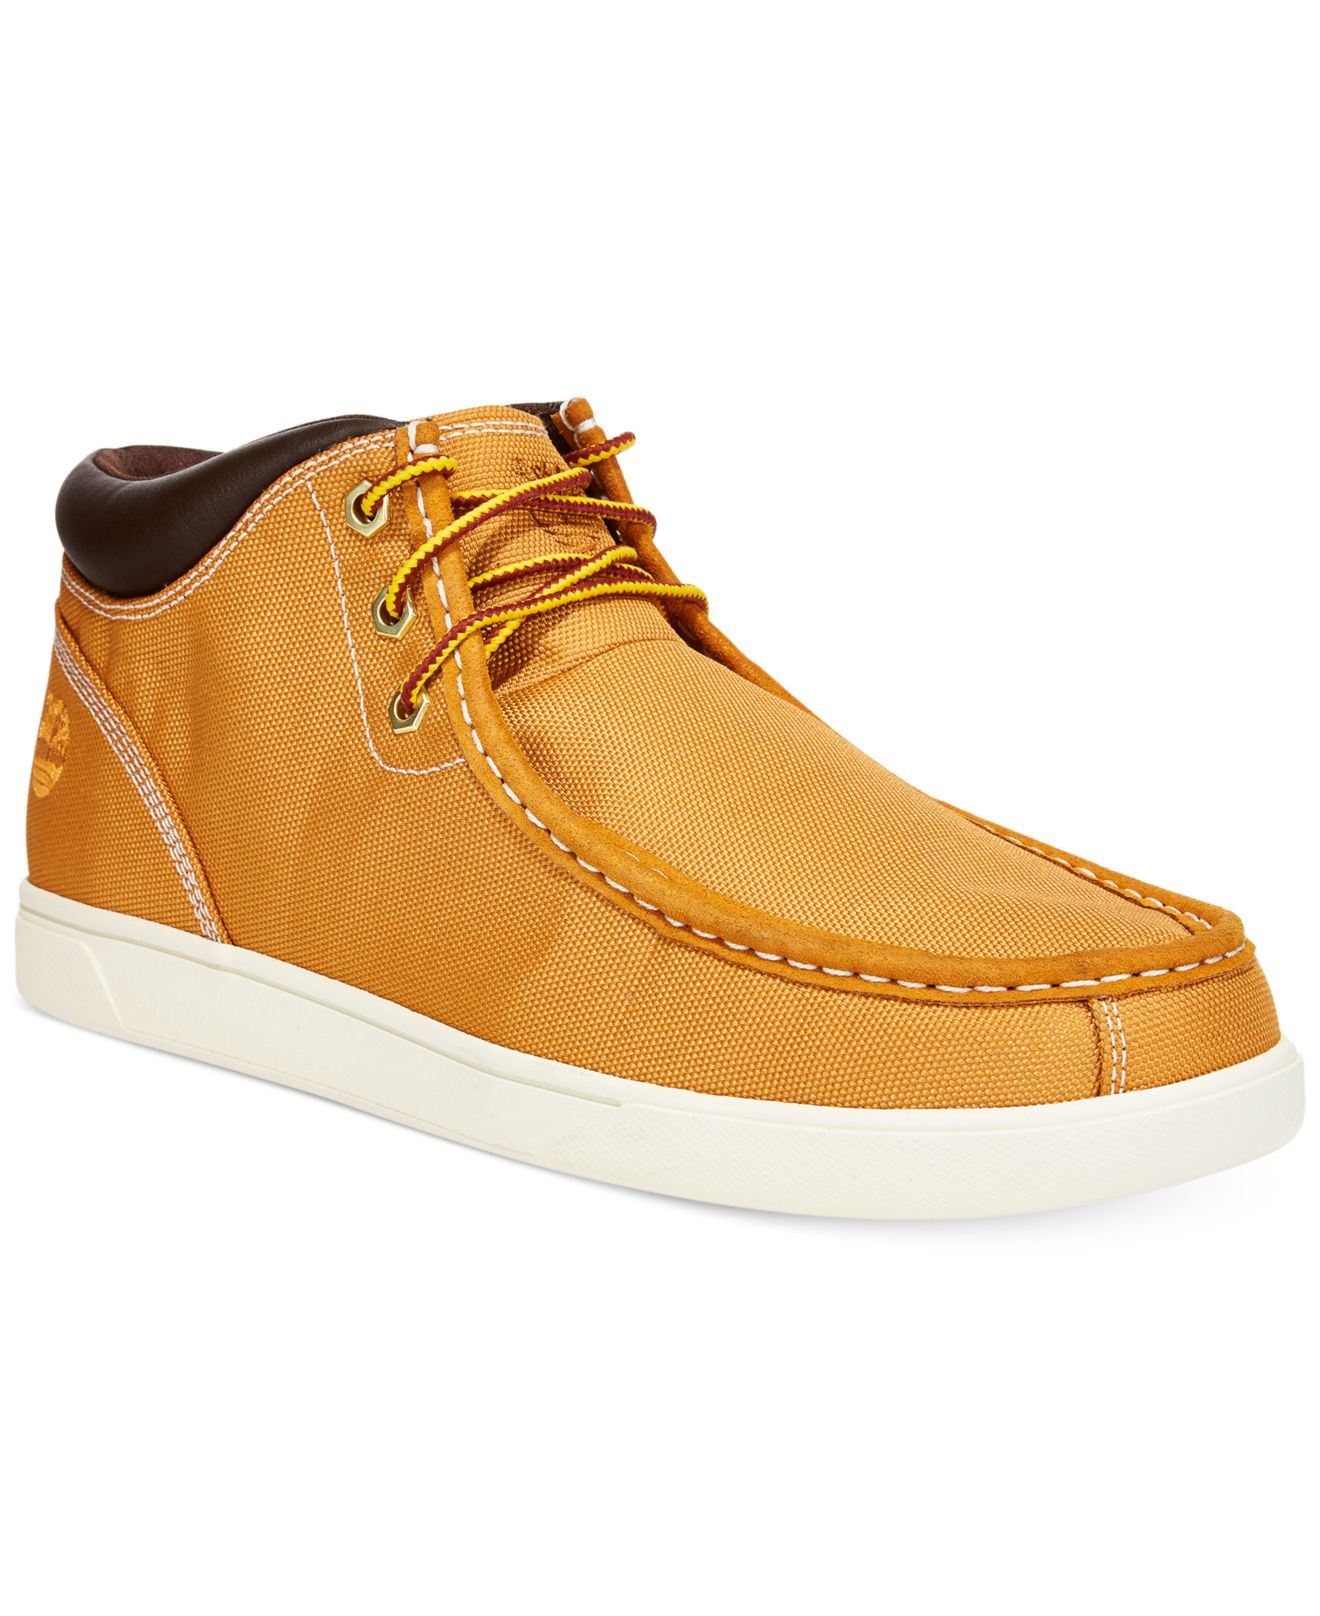 Timberland Earthkeepers Groveton Chukka Boots in Brown for Men - Lyst